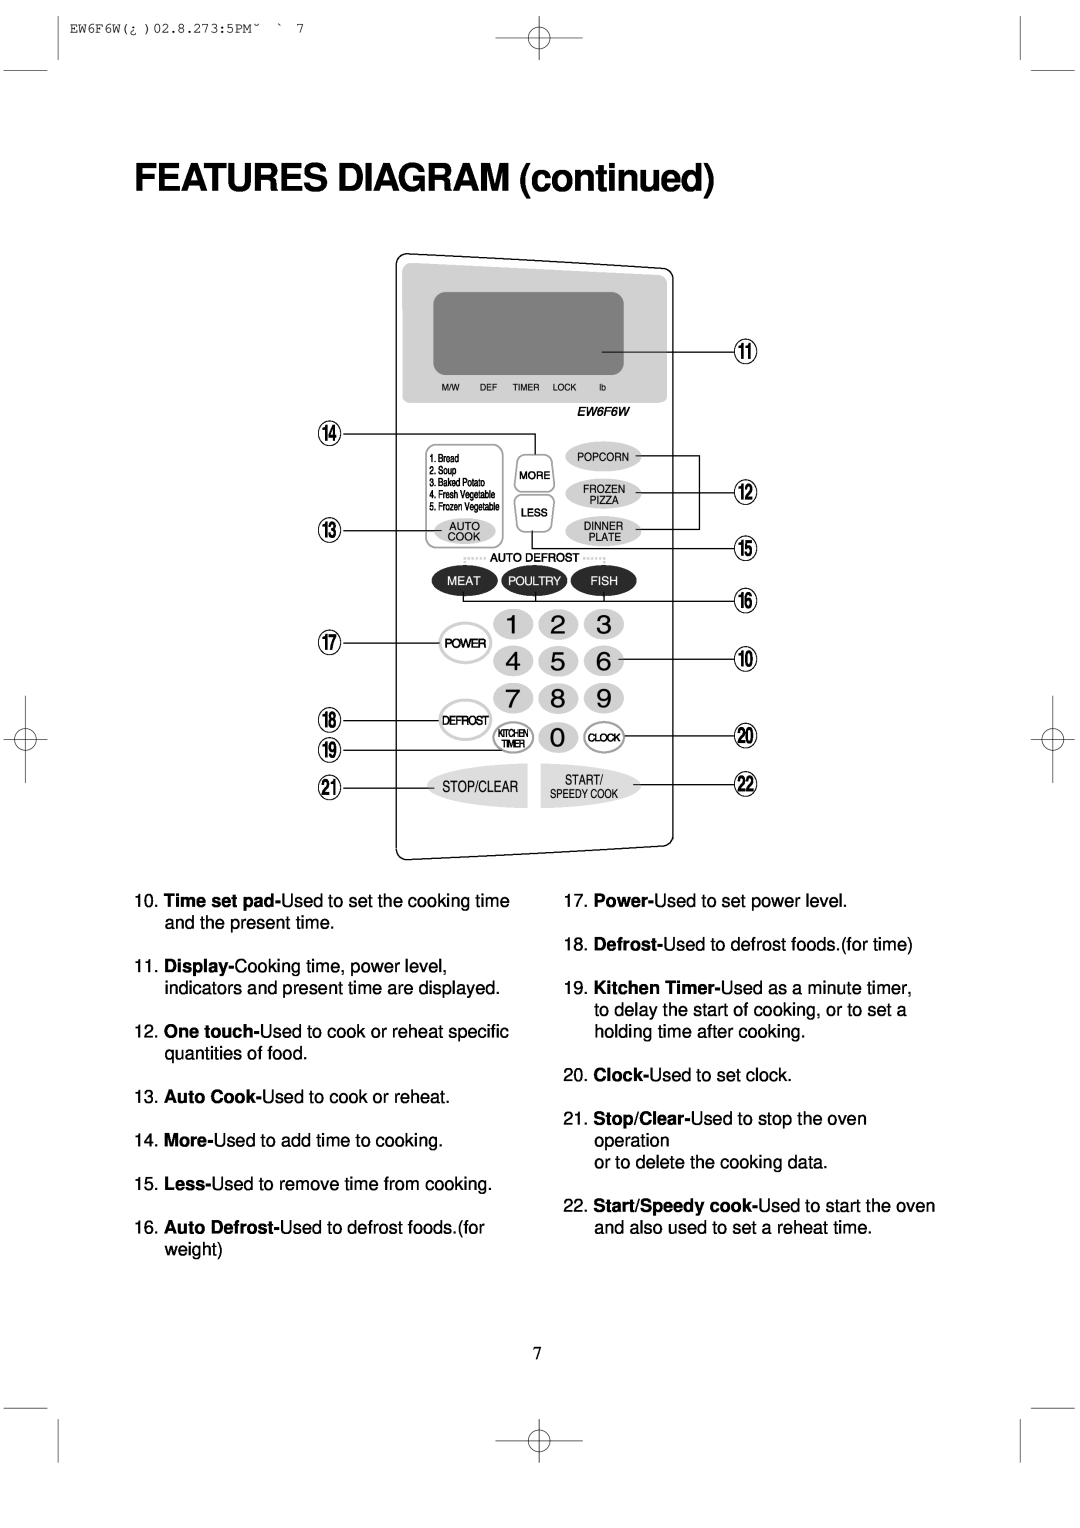 Magic Chef MCD760W instruction manual FEATURES DIAGRAM continued, r e u i o a, q w t y 0 p s 